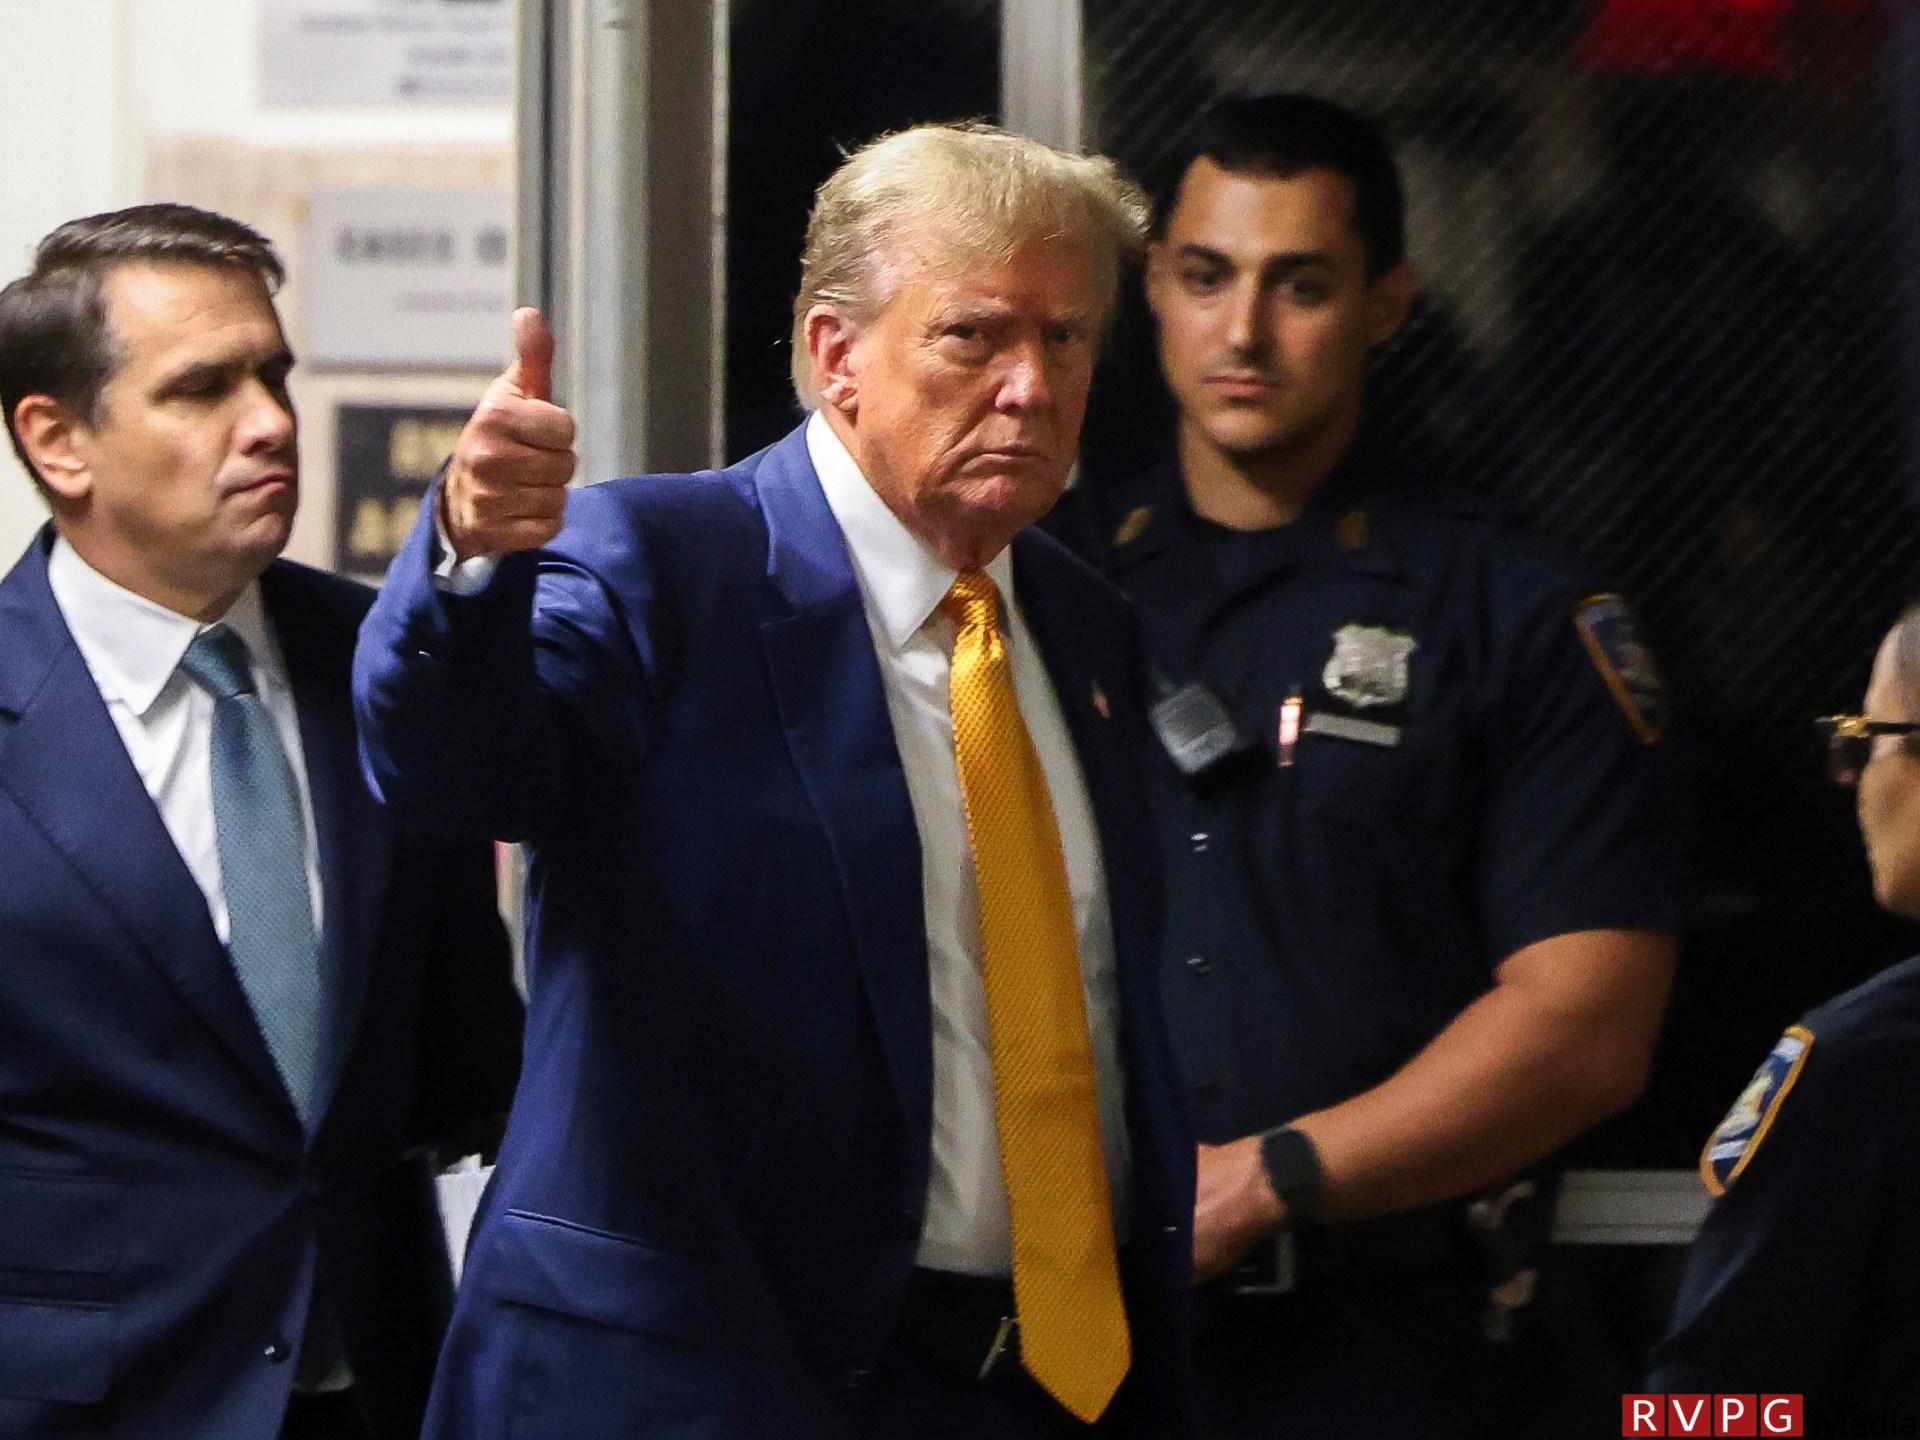 Five takeaways from the tenth day of the New York hush money trial against Donald Trump